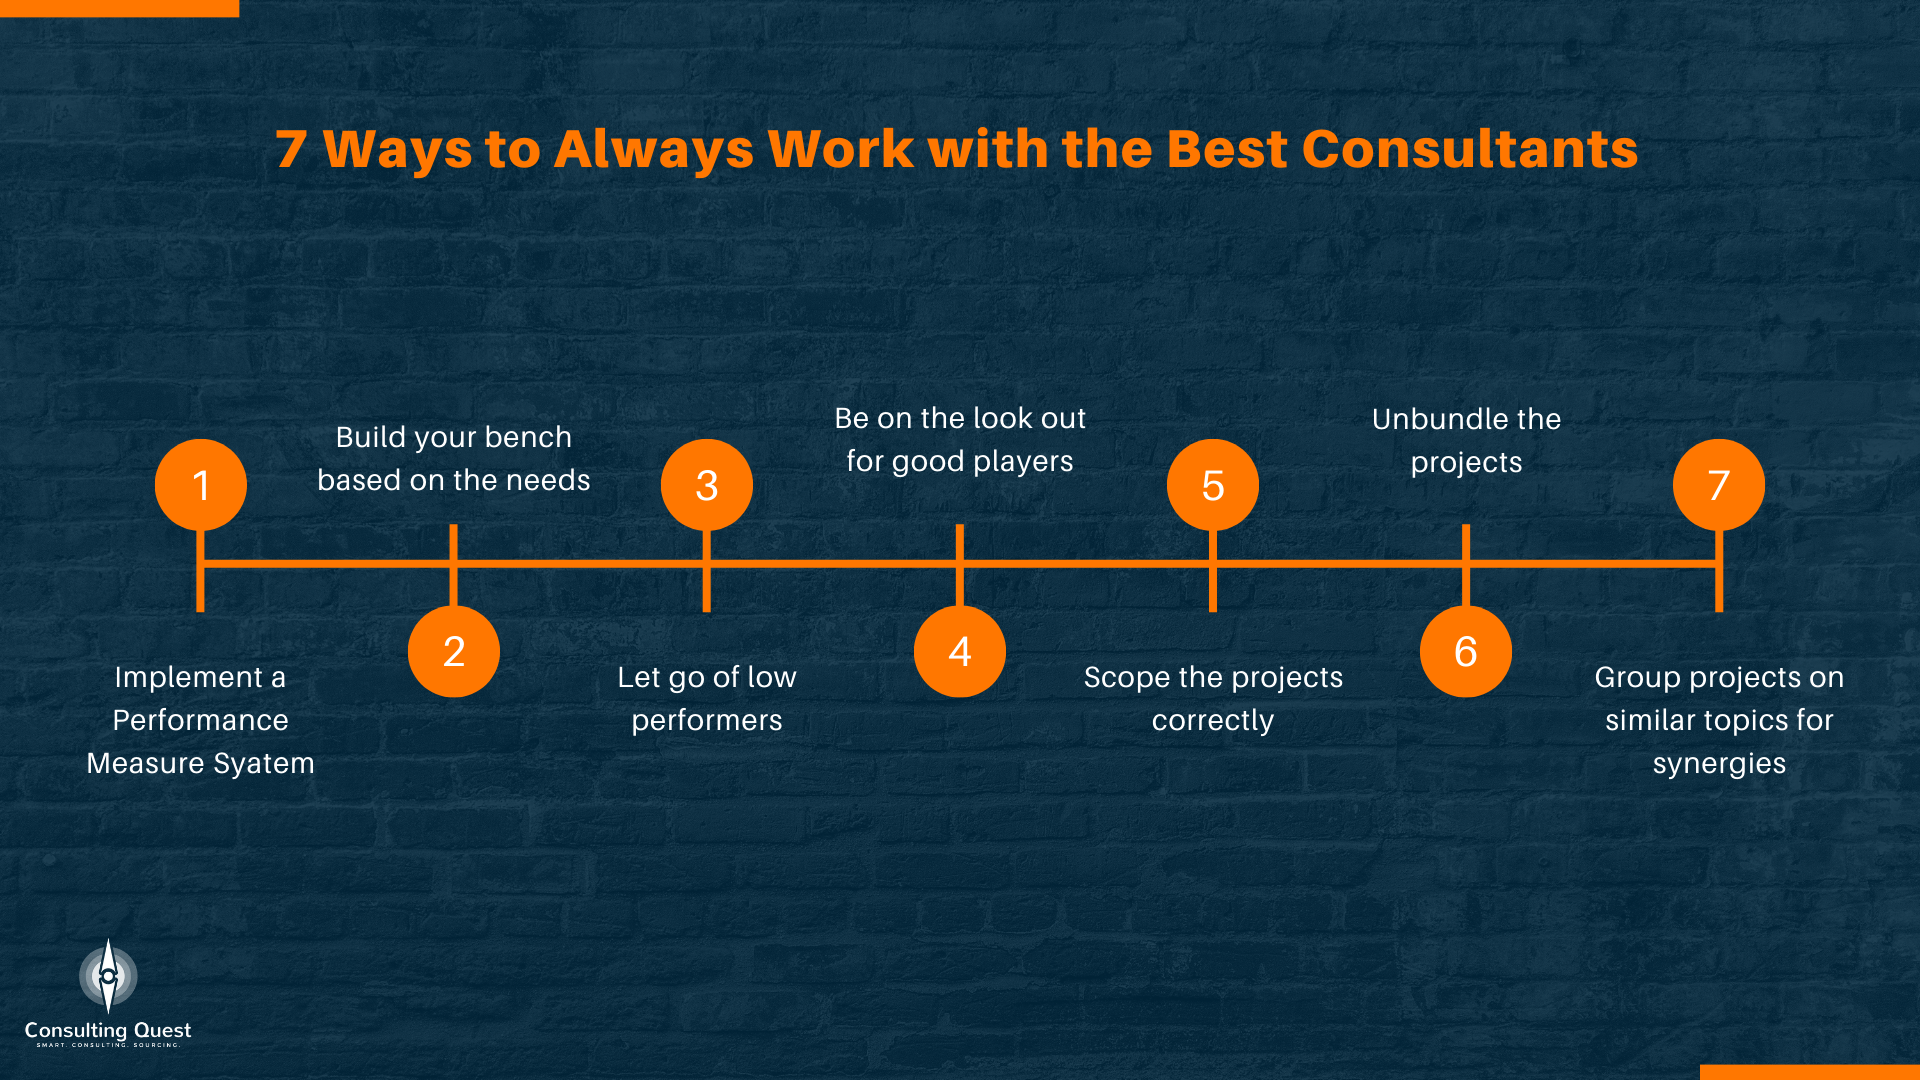 7 Ways to Always Work with the Best Consultants